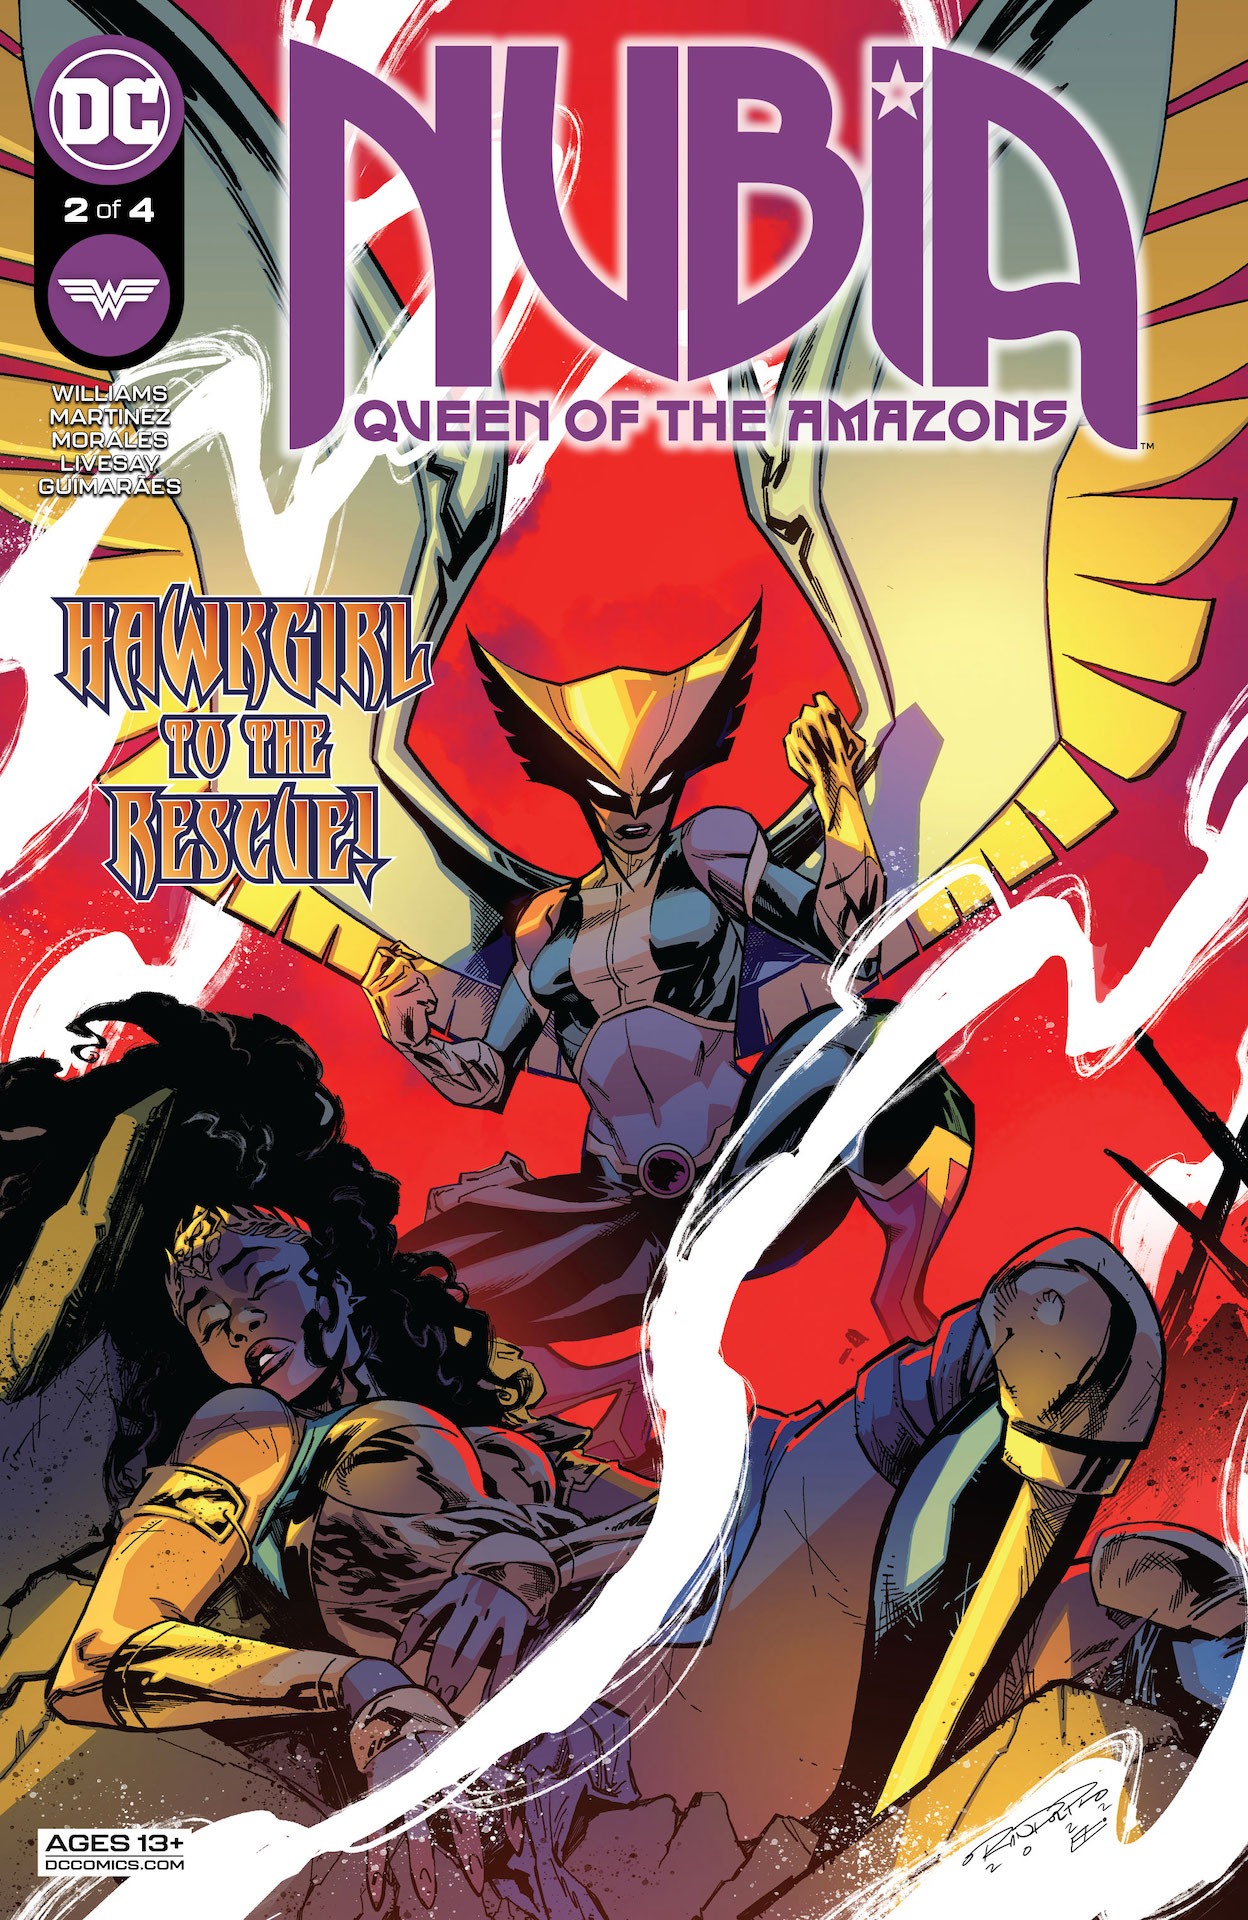 DC Preview: Nubia: Queen of the Amazons #2